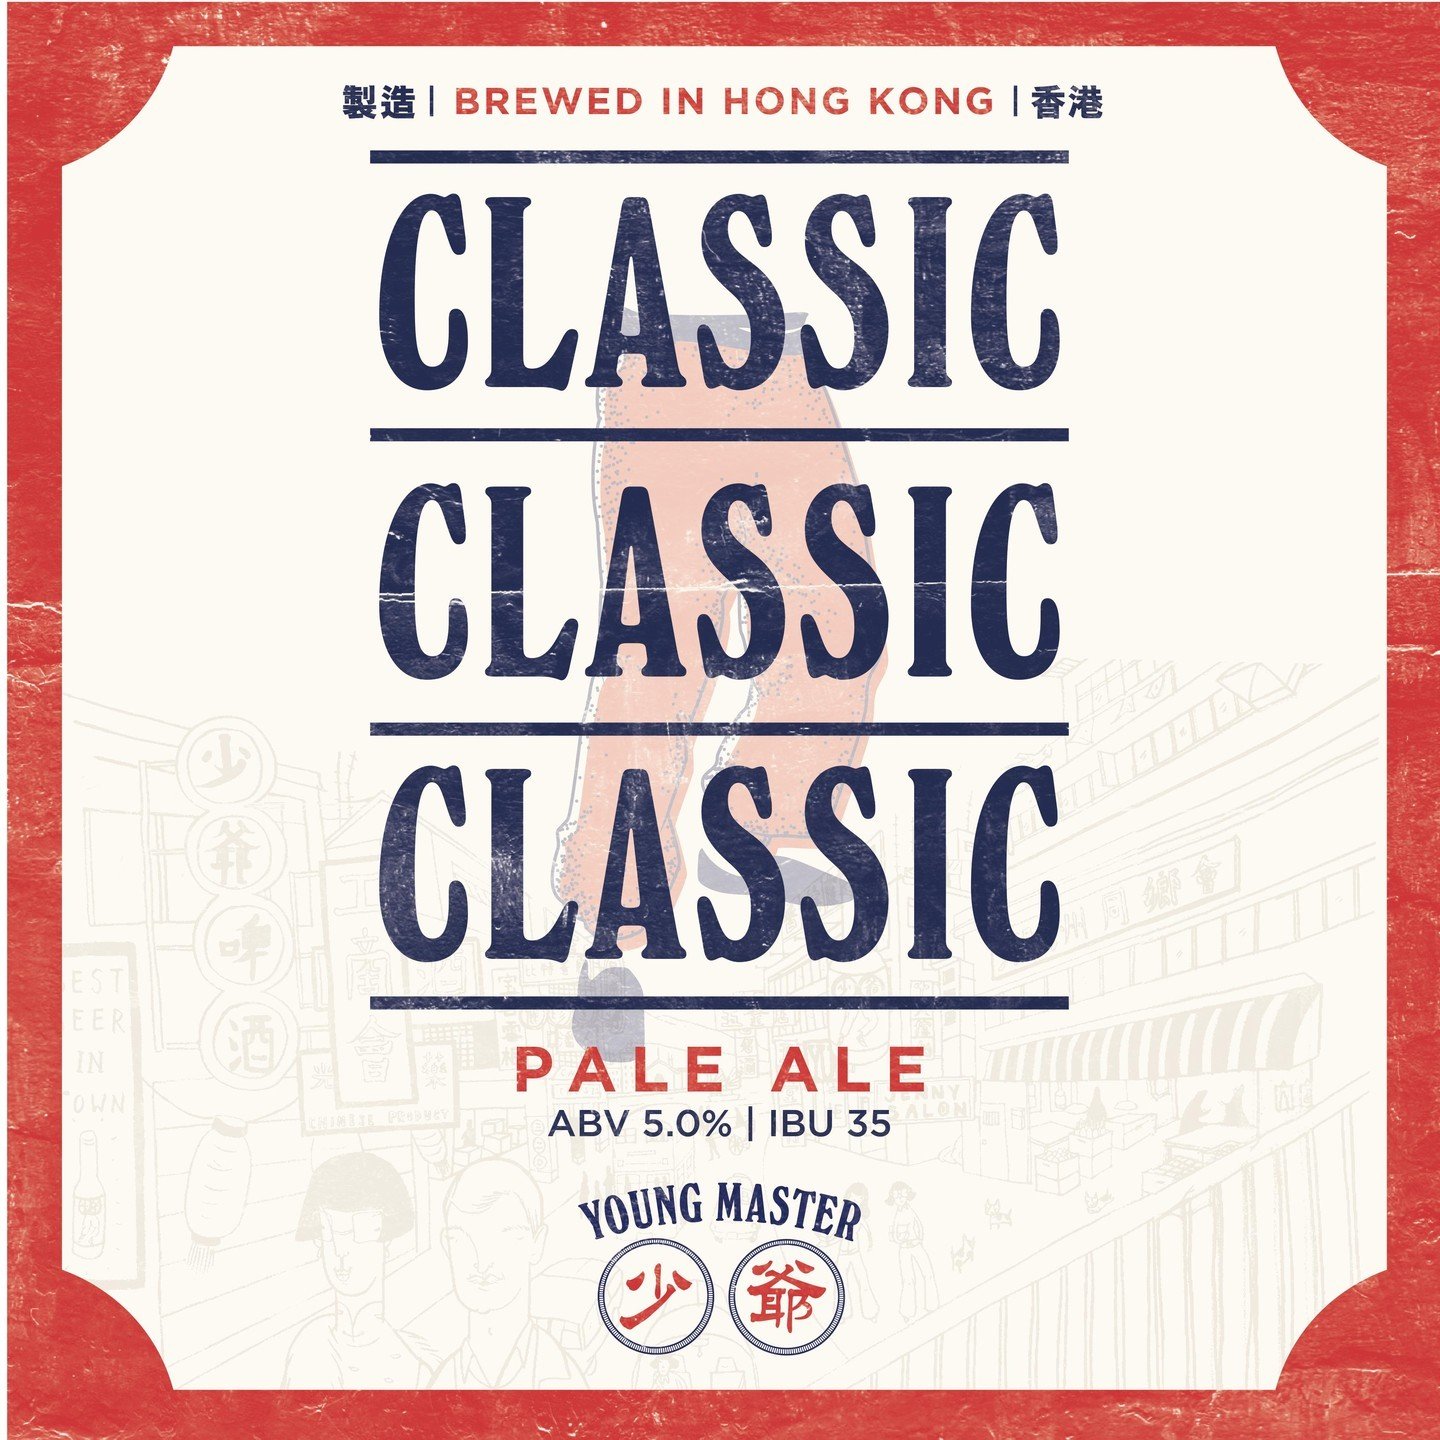 Introducing our latest addition to the guest tap lineup: @YoungMasterAles Classic Pale Ale. 🍺 

This is a timeless brew that never goes out of style. Crafted to be enjoyed all day, all year round, this pale ale boasts an elegant balance of malts and